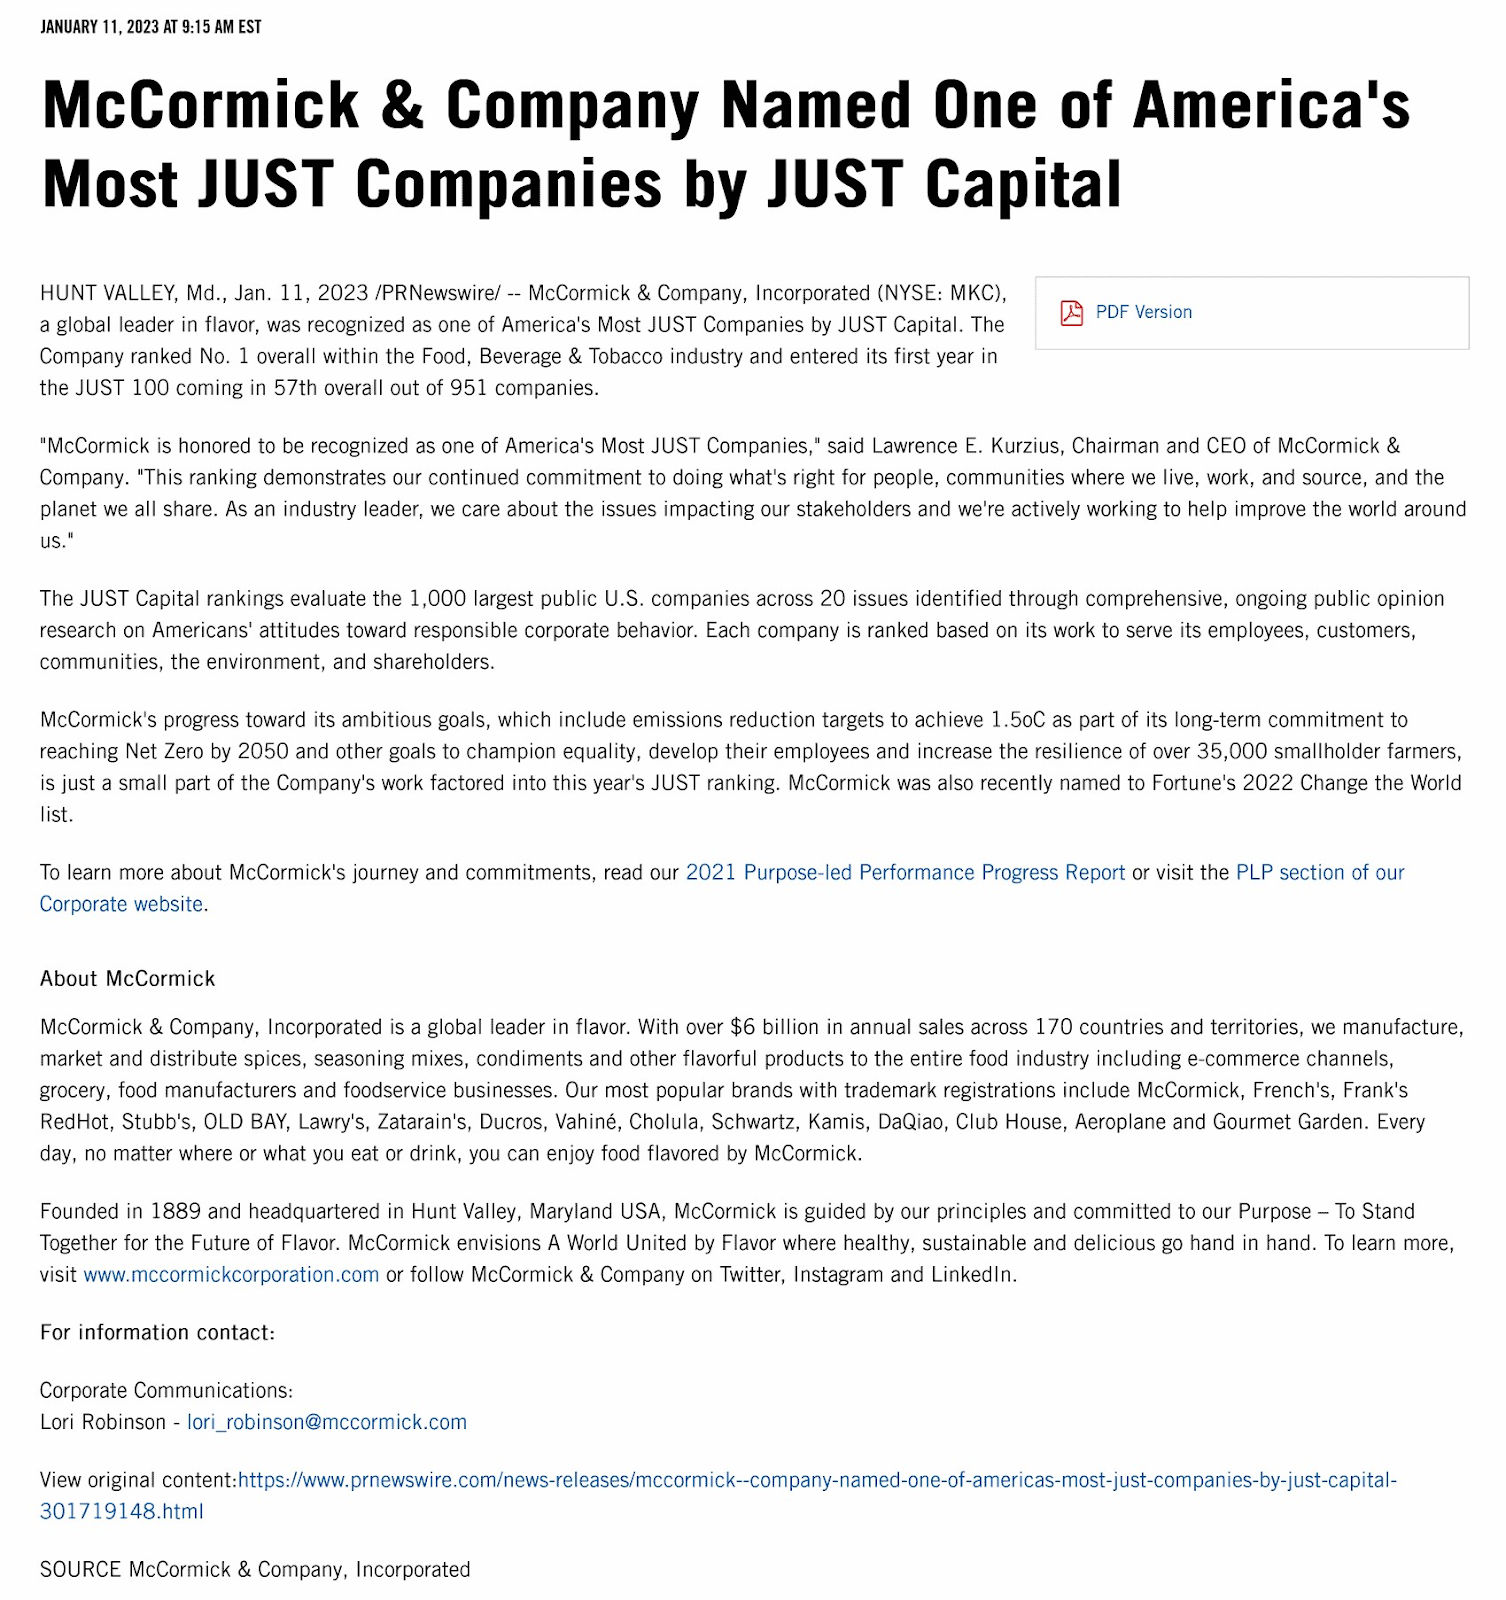 An example of McCormick & Company's press release